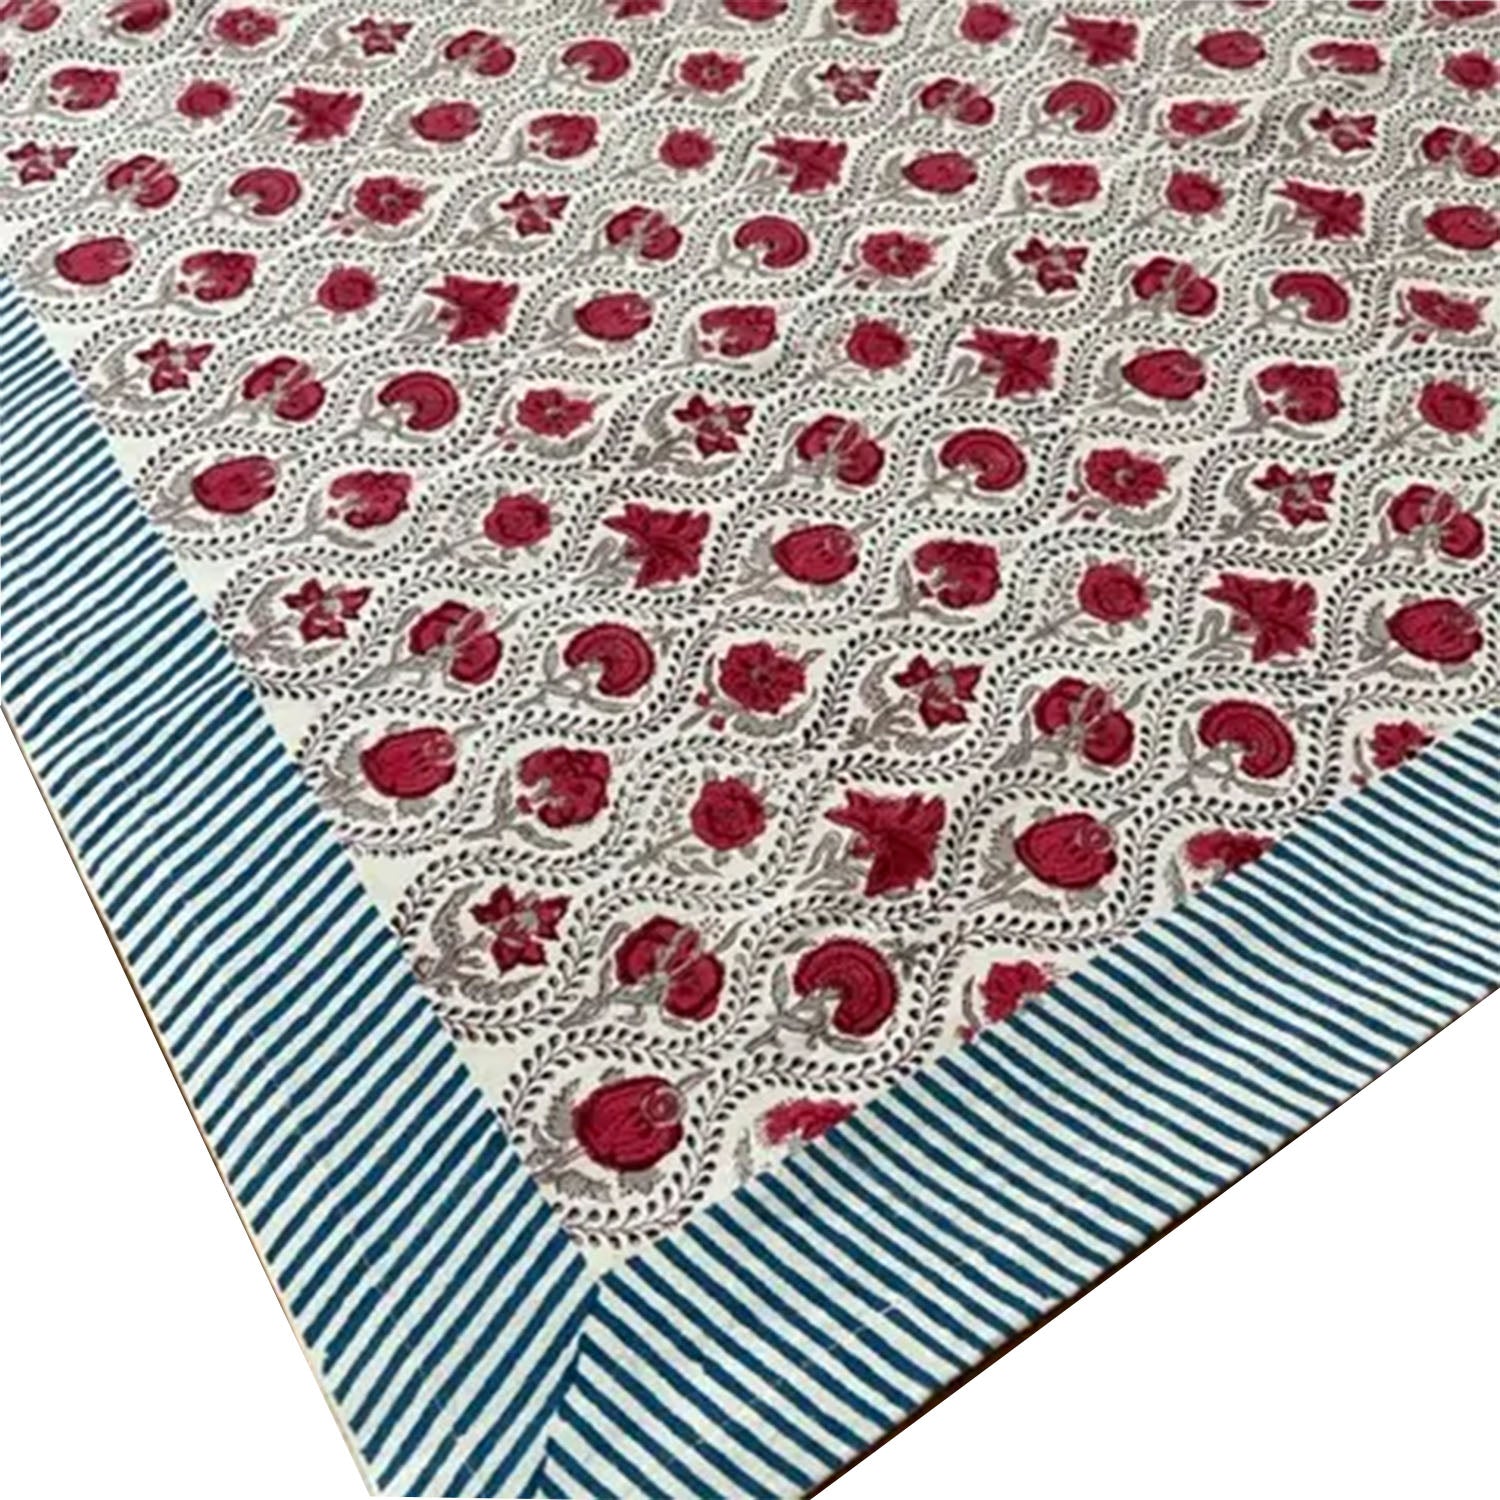 Red Rose Tablecloth